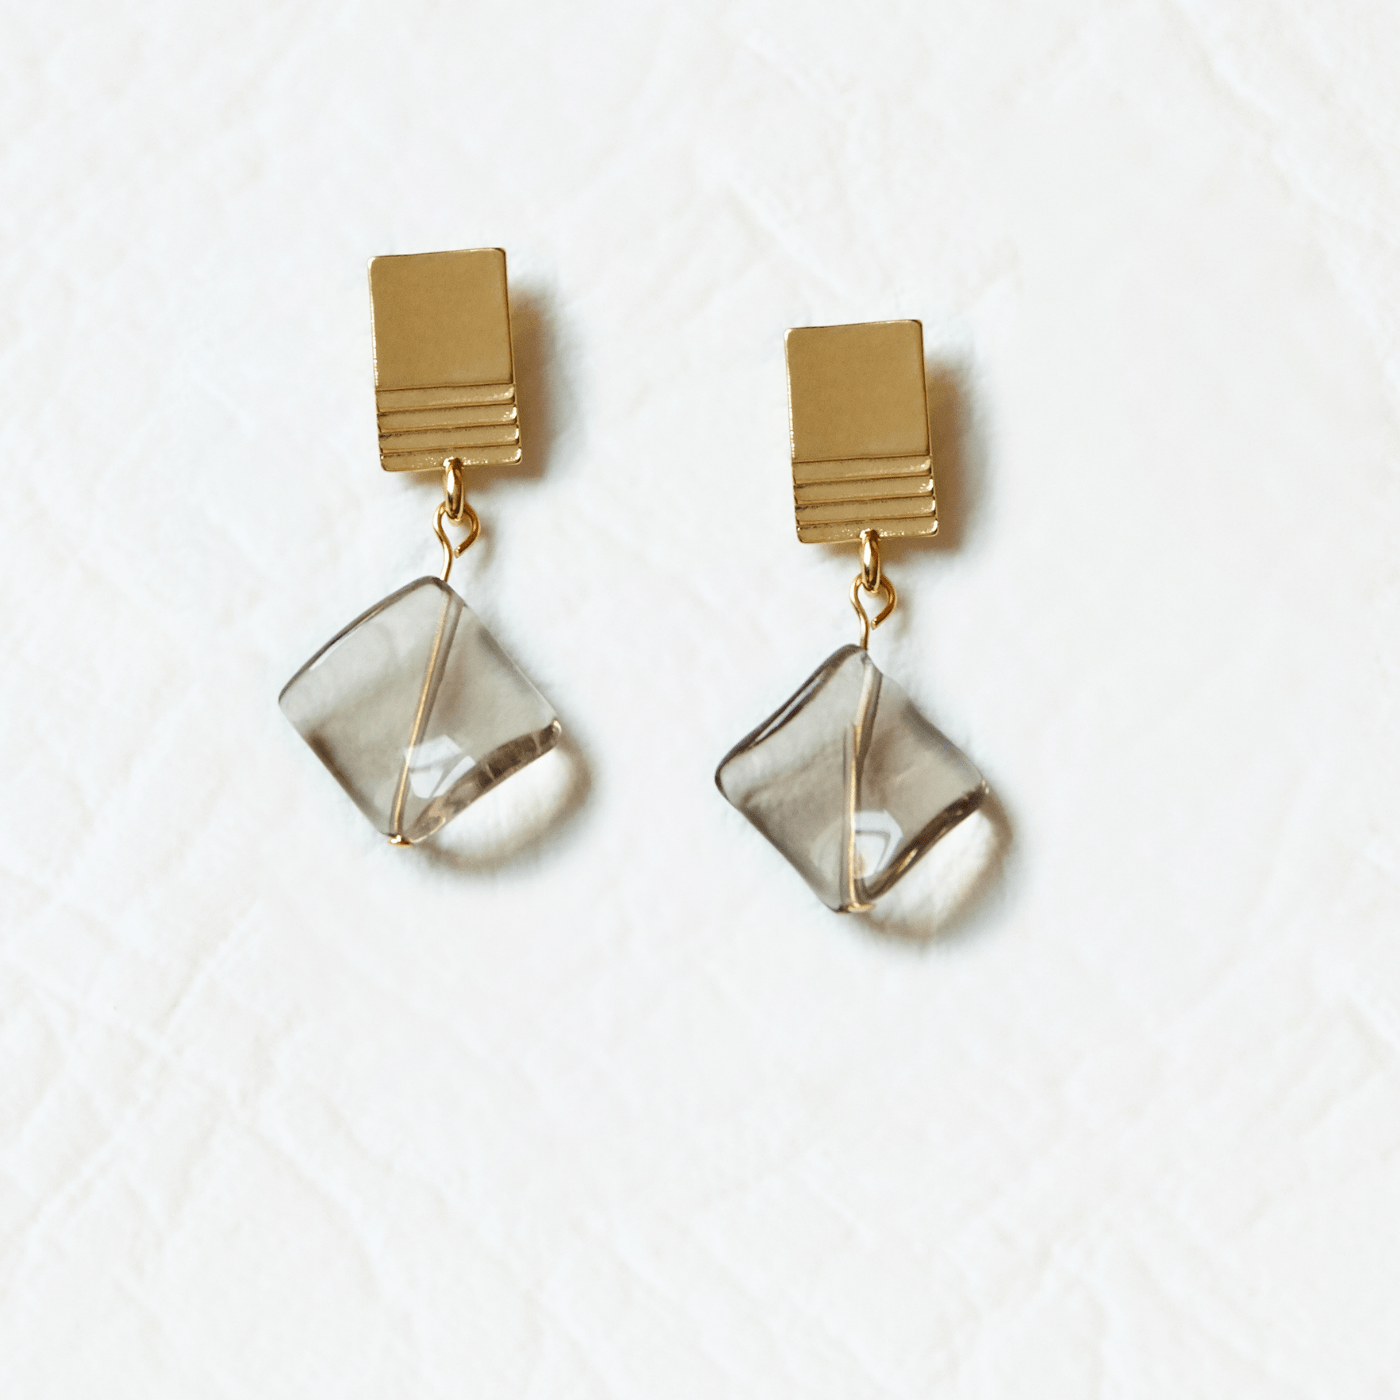 VUE by SEK Earrings gold layered square + twisted smoky quartz earrings